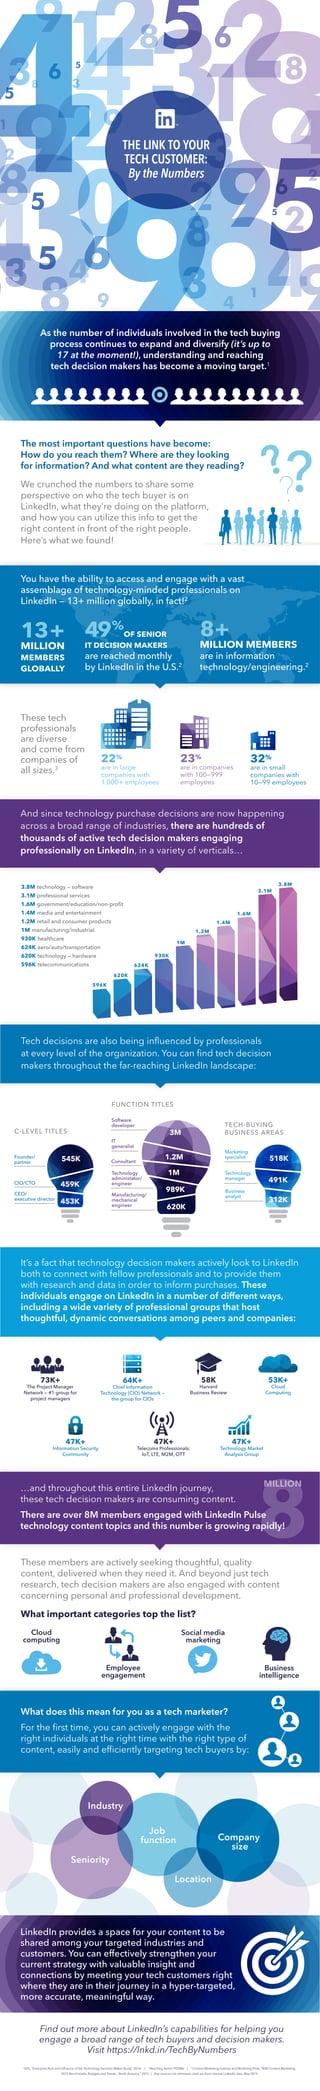 THE LINK TO YOUR
TECH CUSTOMER:
By the Numbers
Job
function Company
size
Seniority
Location
Industry
8
We crunched the numbers to share some
perspective on who the tech buyer is on
LinkedIn, what they’re doing on the platform,
and how you can utilize this info to get the
right content in front of the right people.
Here’s what we found!
And since technology purchase decisions are now happening
across a broad range of industries, there are hundreds of
thousands of active tech decision makers engaging
professionally on LinkedIn, in a variety of verticals…
What does this mean for you as a tech marketer?
For the ﬁrst time, you can actively engage with the
right individuals at the right time with the right type of
content, easily and efﬁciently targeting tech buyers by:
These members are actively seeking thoughtful, quality
content, delivered when they need it. And beyond just tech
research, tech decision makers are also engaged with content
concerning personal and professional development.
1
IDG, “Enterprise Role and Inﬂuence of the Technology Decision-Maker Study,” 2014 | 2
Reaching Senior ITDSMs | 3
Content Marketing Institute and Marketing Profs, “B2B Content Marketing:
2015 Benchmarks, Budgets and Trends – North America,” 2015 | Any sources not otherwise cited are from internal LinkedIn data, May 2015
These tech
professionals
are diverse
and come from
companies of
all sizes.3
As the number of individuals involved in the tech buying
process continues to expand and diversify (it’s up to
17 at the moment!), understanding and reaching
tech decision makers has become a moving target.1
The most important questions have become:
How do you reach them? Where are they looking
for information? And what content are they reading?
You have the ability to access and engage with a vast
assemblage of technology-minded professionals on
LinkedIn — 13+ million globally, in fact!2
13+
MILLION
MEMBERS
GLOBALLY
49%
OF SENIOR
IT DECISION MAKERS
are reached monthly
by LinkedIn in the U.S.2
8+
MILLION MEMBERS
are in information
technology/engineering.2
32%
are in small
companies with
10—99 employees
23%
are in companies
with 100—999
employees
22%
are in large
companies with
1,000+ employees
3.8M technology — software
3.1M professional services
1.6M government/education/non-proﬁt
1.4M media and entertainment
1.2M retail and consumer products
1M manufacturing/industrial
930K healthcare
624K aero/auto/transportation
620K technology — hardware
596K telecommunications
73K+
The Project Manager
Network — #1 group for
project managers
64K+
Chief Information
Technology (CIO) Network —
the group for CIOs
58K
Harvard
Business Review
53K+
Cloud
Computing
47K+
Information Security
Community
47K+
Telecoms Professionals:
IoT, LTE, M2M, OTT
47K+
Technology Market
Analysis Group
…and throughout this entire LinkedIn journey,
these tech decision makers are consuming content.
There are over 8M members engaged with LinkedIn Pulse
technology content topics and this number is growing rapidly!
MILLION
Cloud
computing
Employee
engagement
Social media
marketing
Business
intelligence
What important categories top the list?
LinkedIn provides a space for your content to be
shared among your targeted industries and
customers. You can effectively strengthen your
current strategy with valuable insight and
connections by meeting your tech customers right
where they are in their journey in a hyper-targeted,
more accurate, meaningful way.
Find out more about LinkedIn’s capabilities for helping you
engage a broad range of tech buyers and decision makers.
Visit https://lnkd.in/TechByNumbers
???
596K
620K
624K
930K
1M
1.2M
1.4M
1.6M
3.1M
3.8M
CIO/CTO
CEO/
executive director
Founder/
partner
C-LEVEL TITLES
545K
459K
453K
TECH-BUYING
BUSINESS AREAS
IT
generalist
Consultant
Software
developer
FUNCTION TITLES
3M
1.2M
620K
1MTechnology
administator/
engineer
Business
analyst
Marketing
specialist 518K
491K
312K
Technology
manager
989K
Manufacturing/
mechanical
engineer
It’s a fact that technology decision makers actively look to LinkedIn
both to connect with fellow professionals and to provide them
with research and data in order to inform purchases. These
individuals engage on LinkedIn in a number of different ways,
including a wide variety of professional groups that host
thoughtful, dynamic conversations among peers and companies:
Tech decisions are also being inﬂuenced by professionals
at every level of the organization. You can ﬁnd tech decision
makers throughout the far-reaching LinkedIn landscape:
 